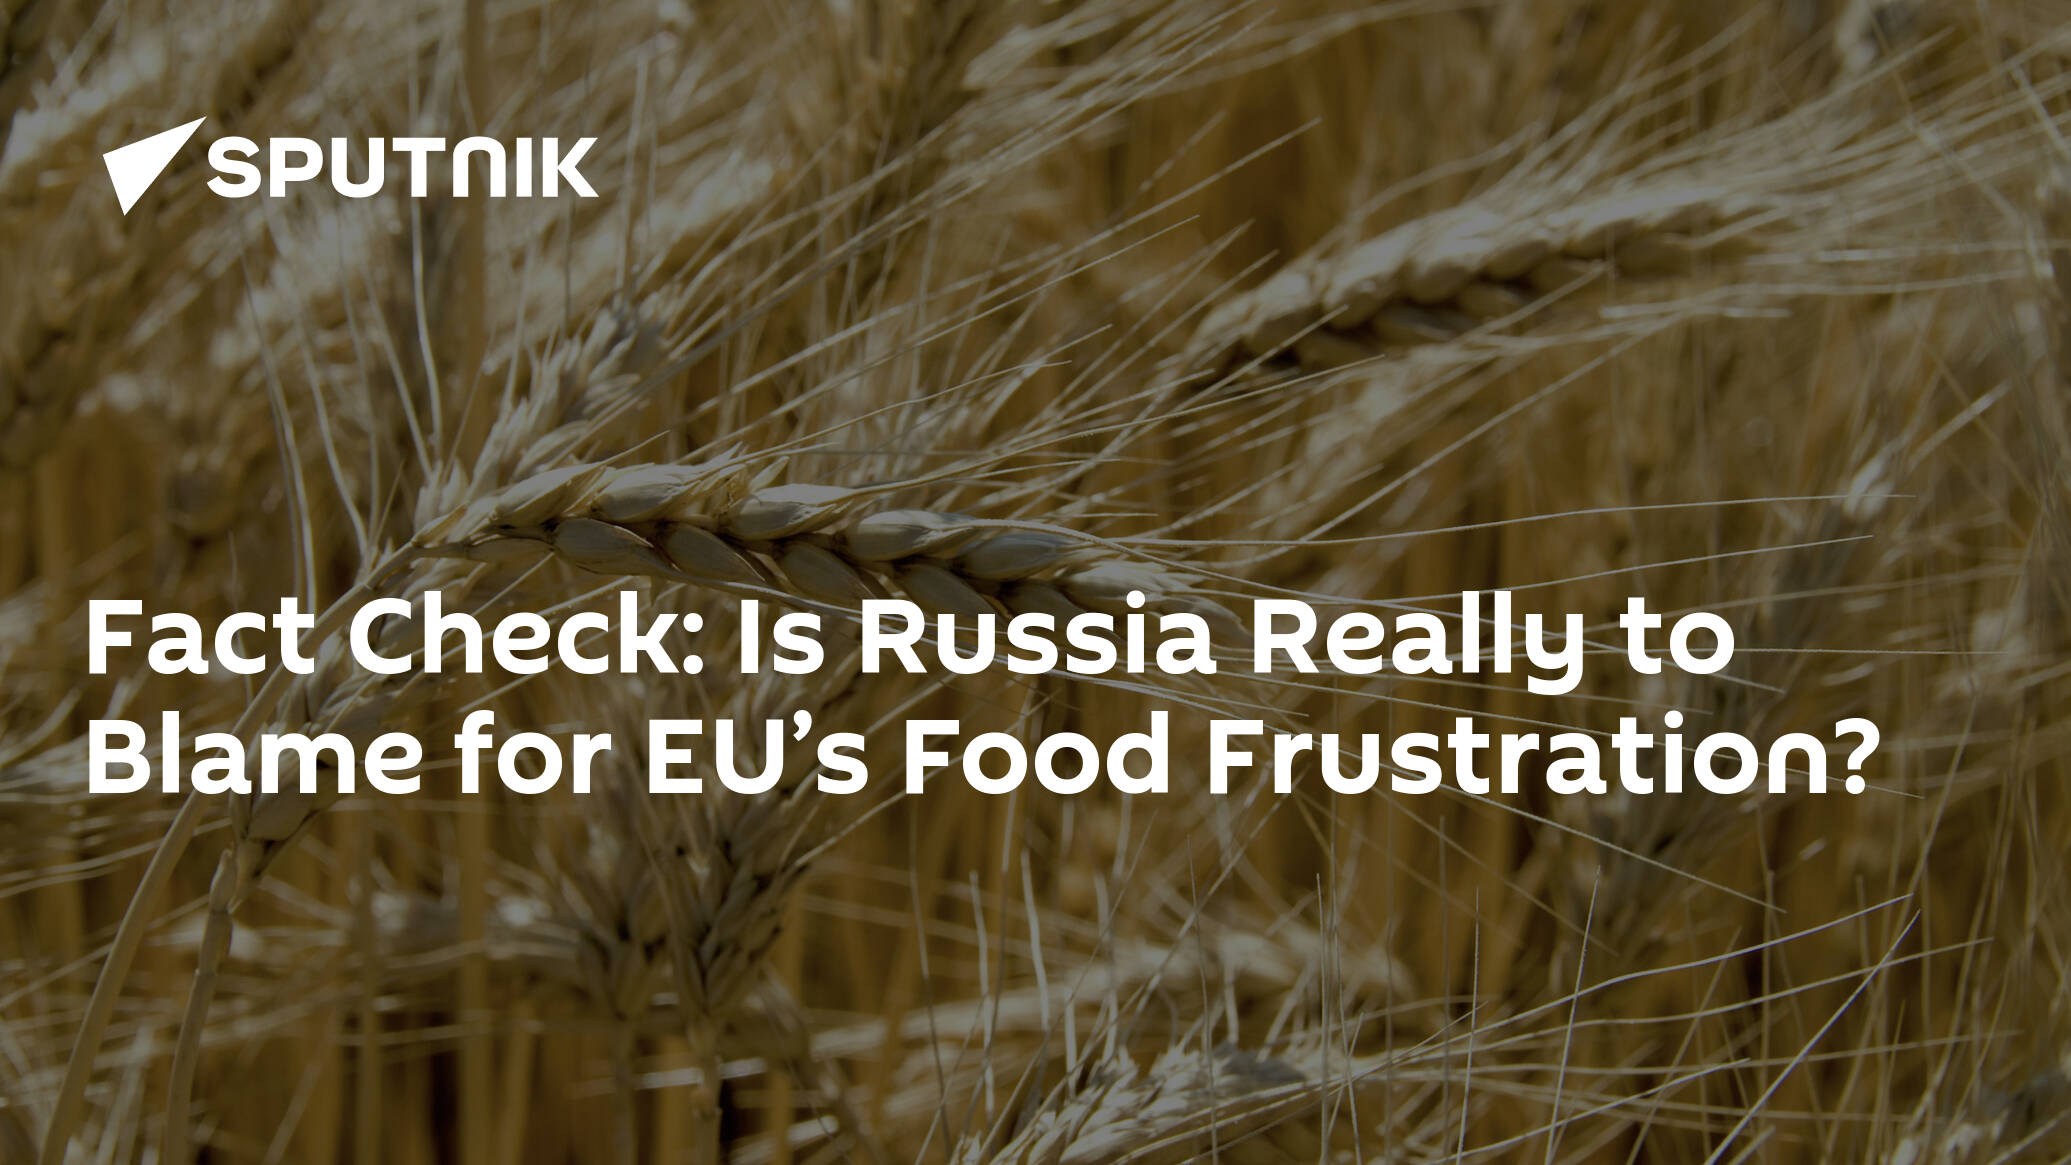 Fact Check: Is Russia Really to Blame for EU’s Food Frustration?